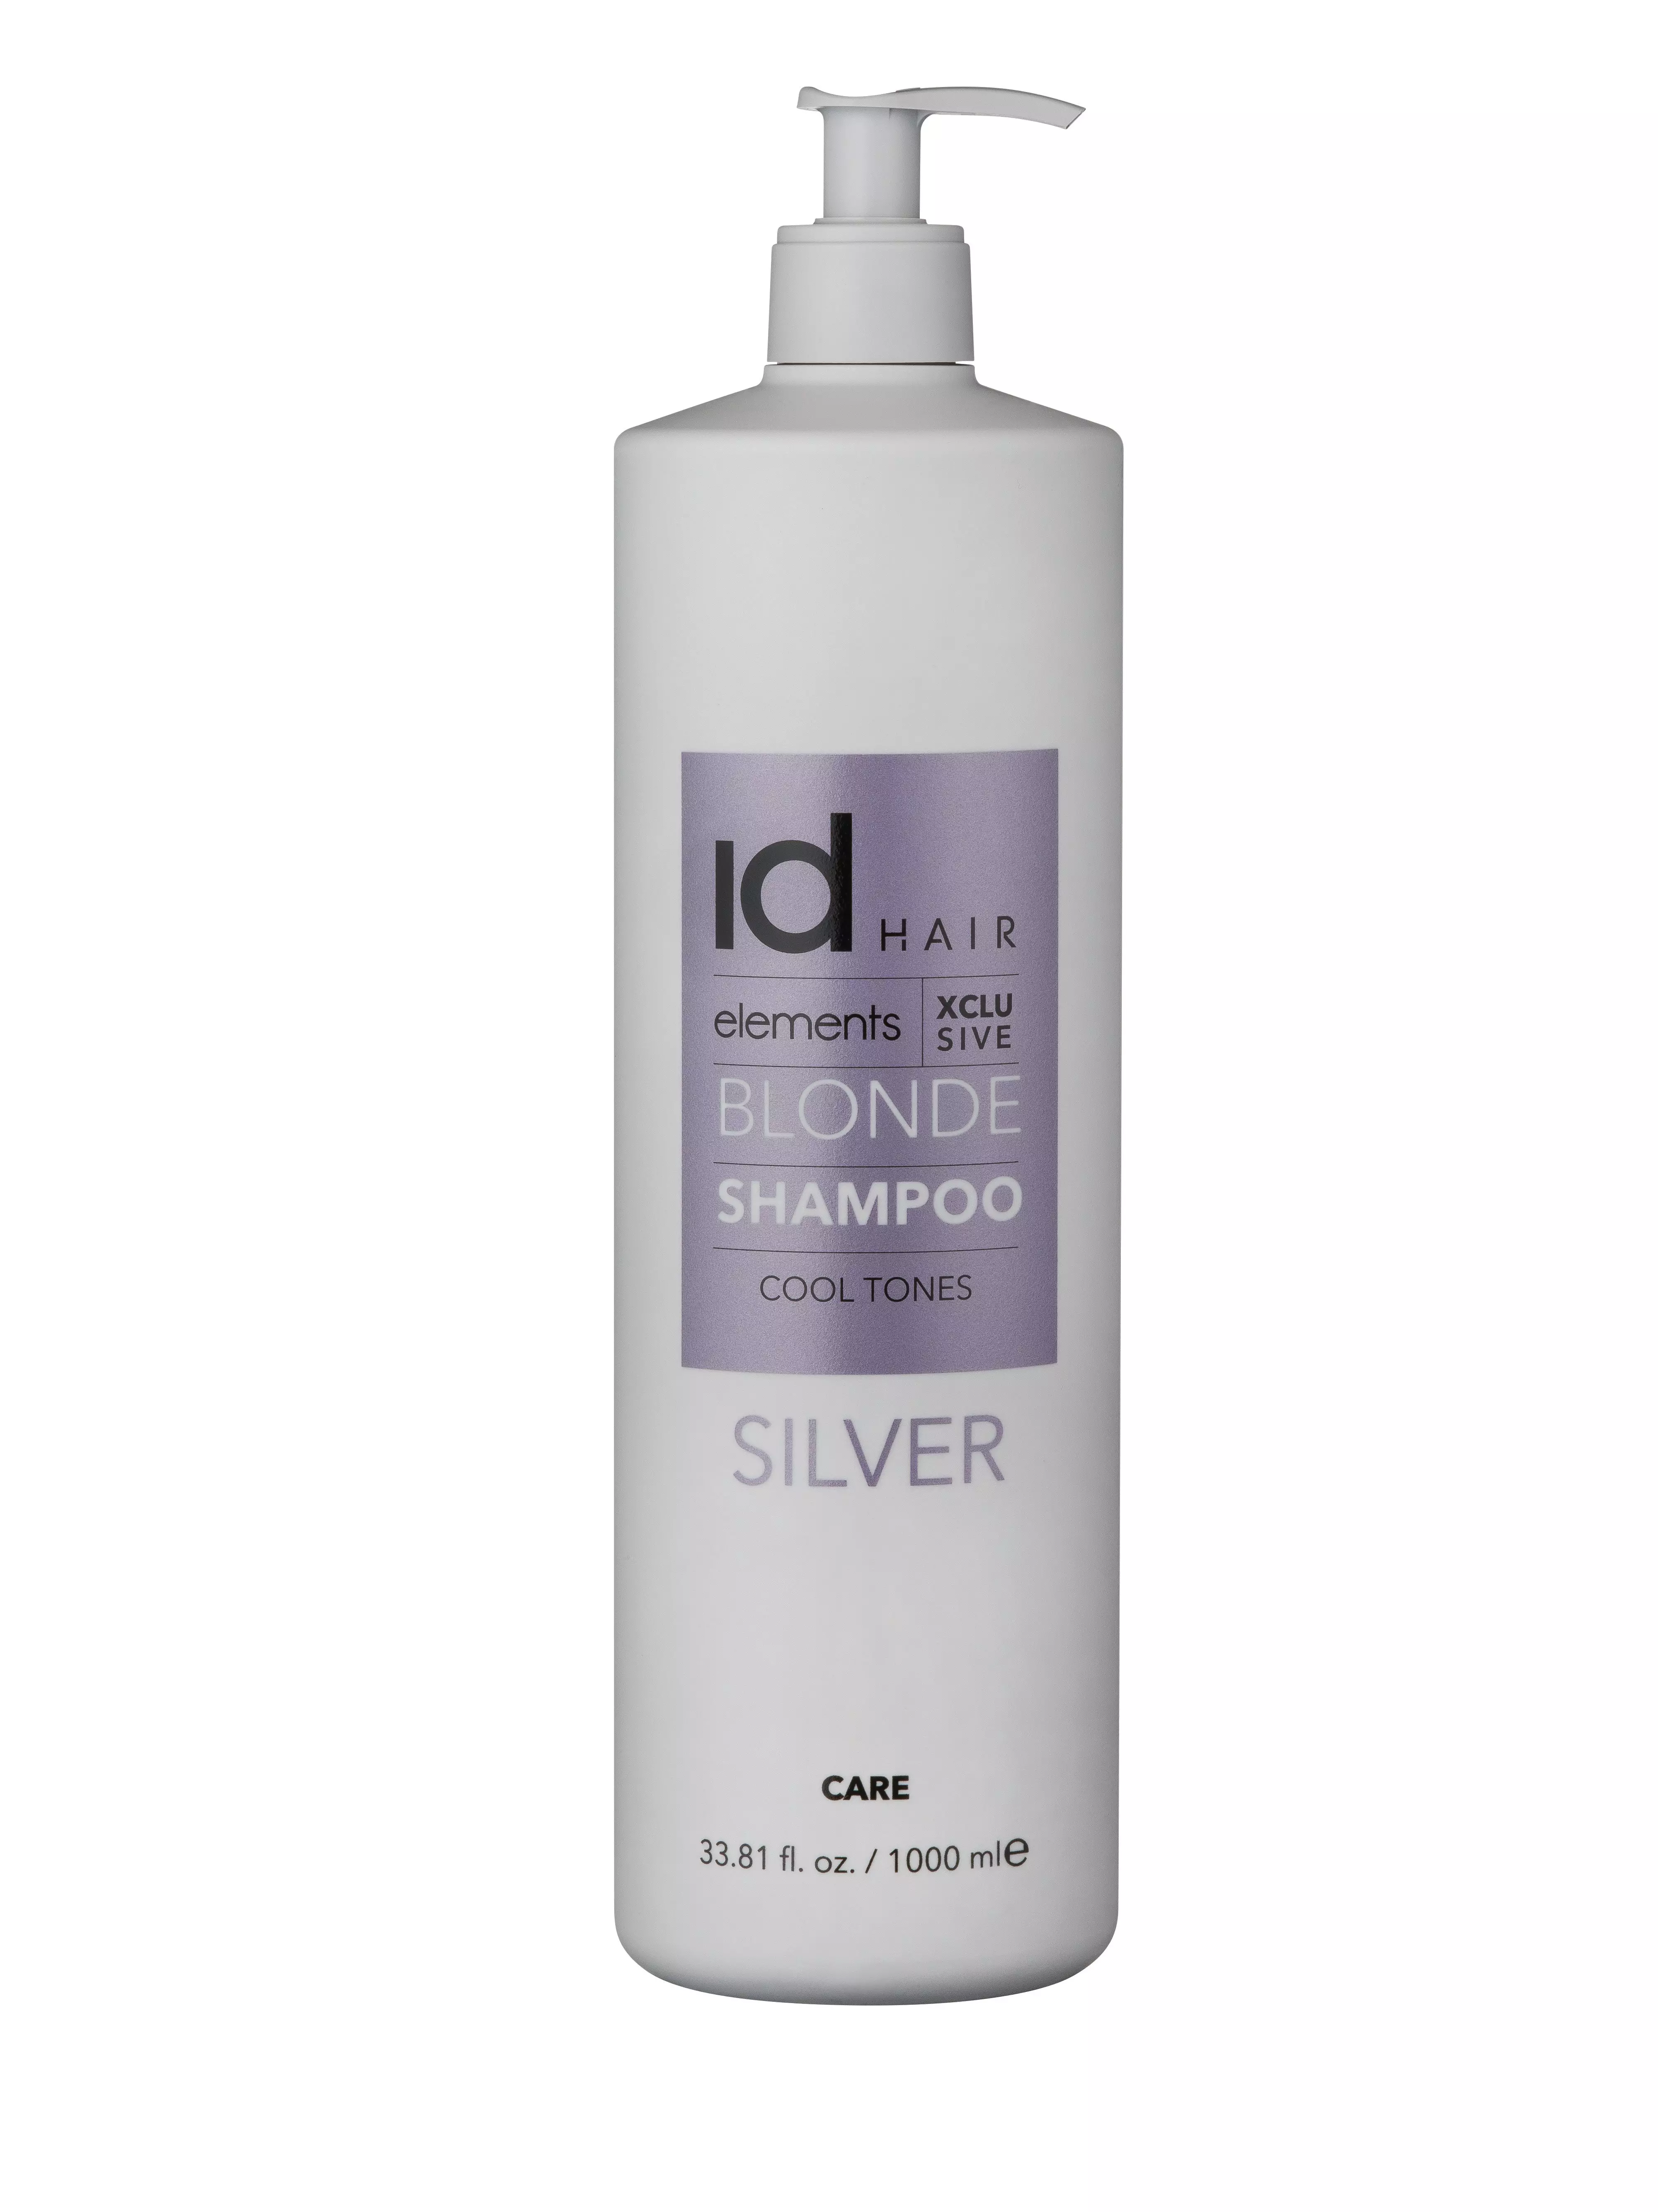 Idhair Elements Xclusive Silver Shampoo 1000